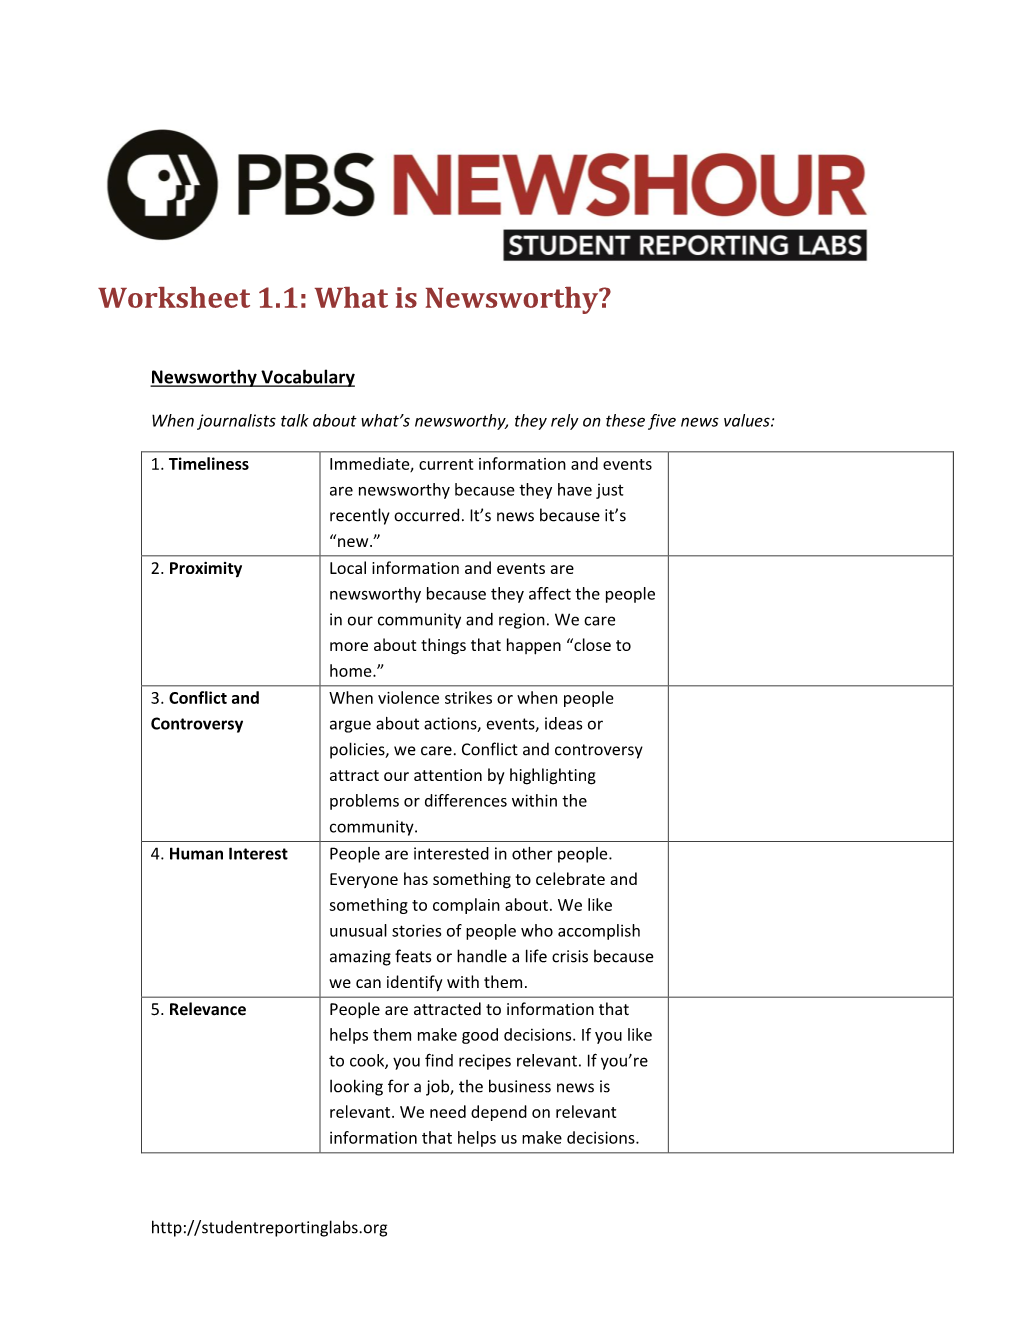 Worksheet 1.1: What Is Newsworthy?